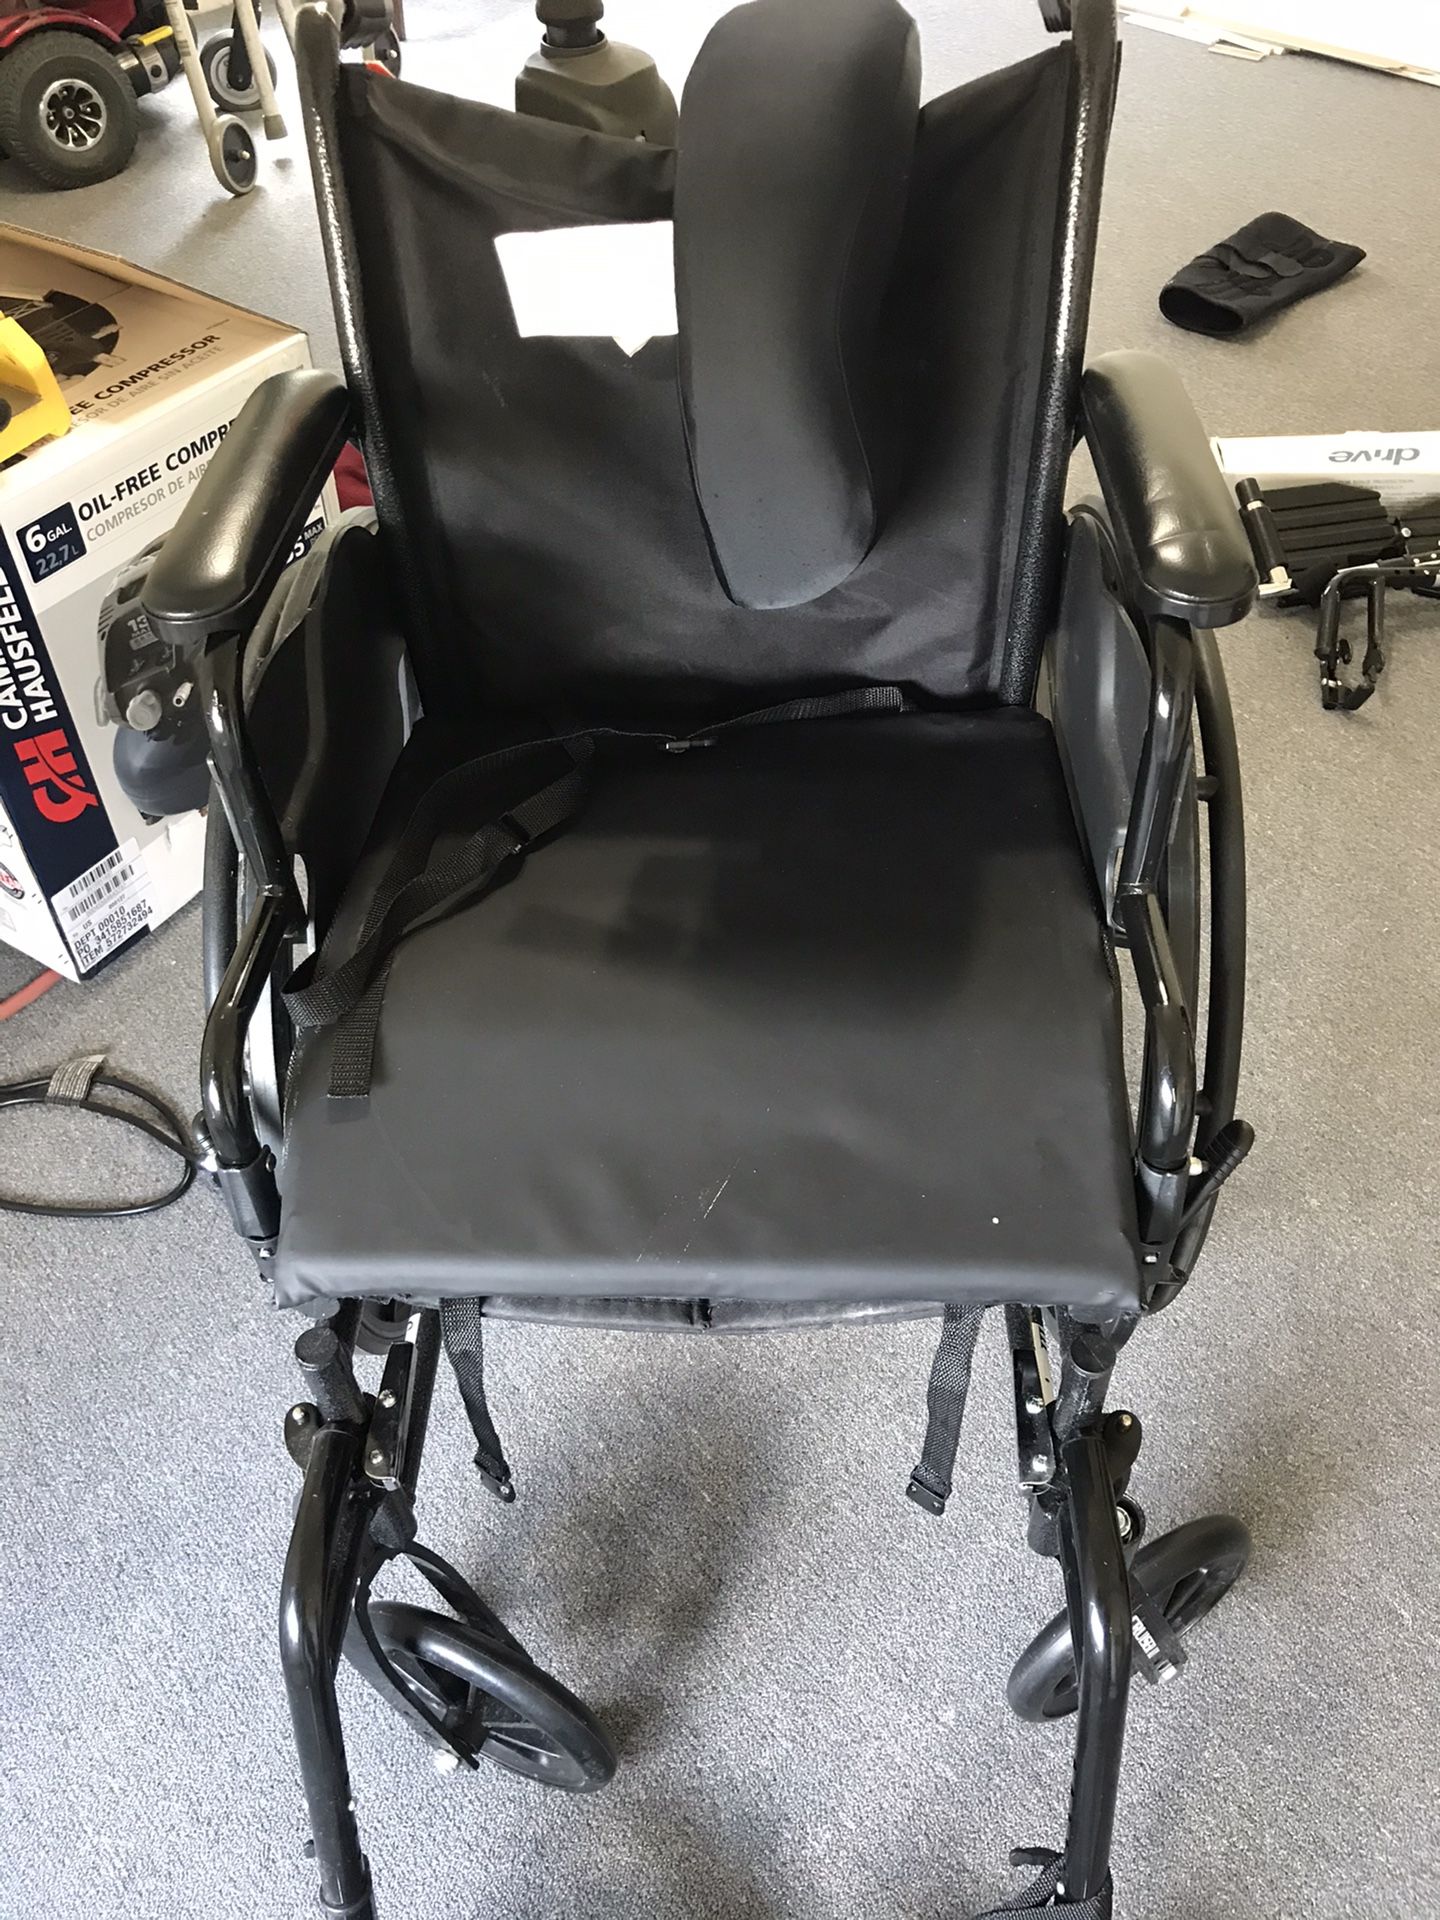 Gently Used Comfort Element Drive cruiser lll Wheelchair 